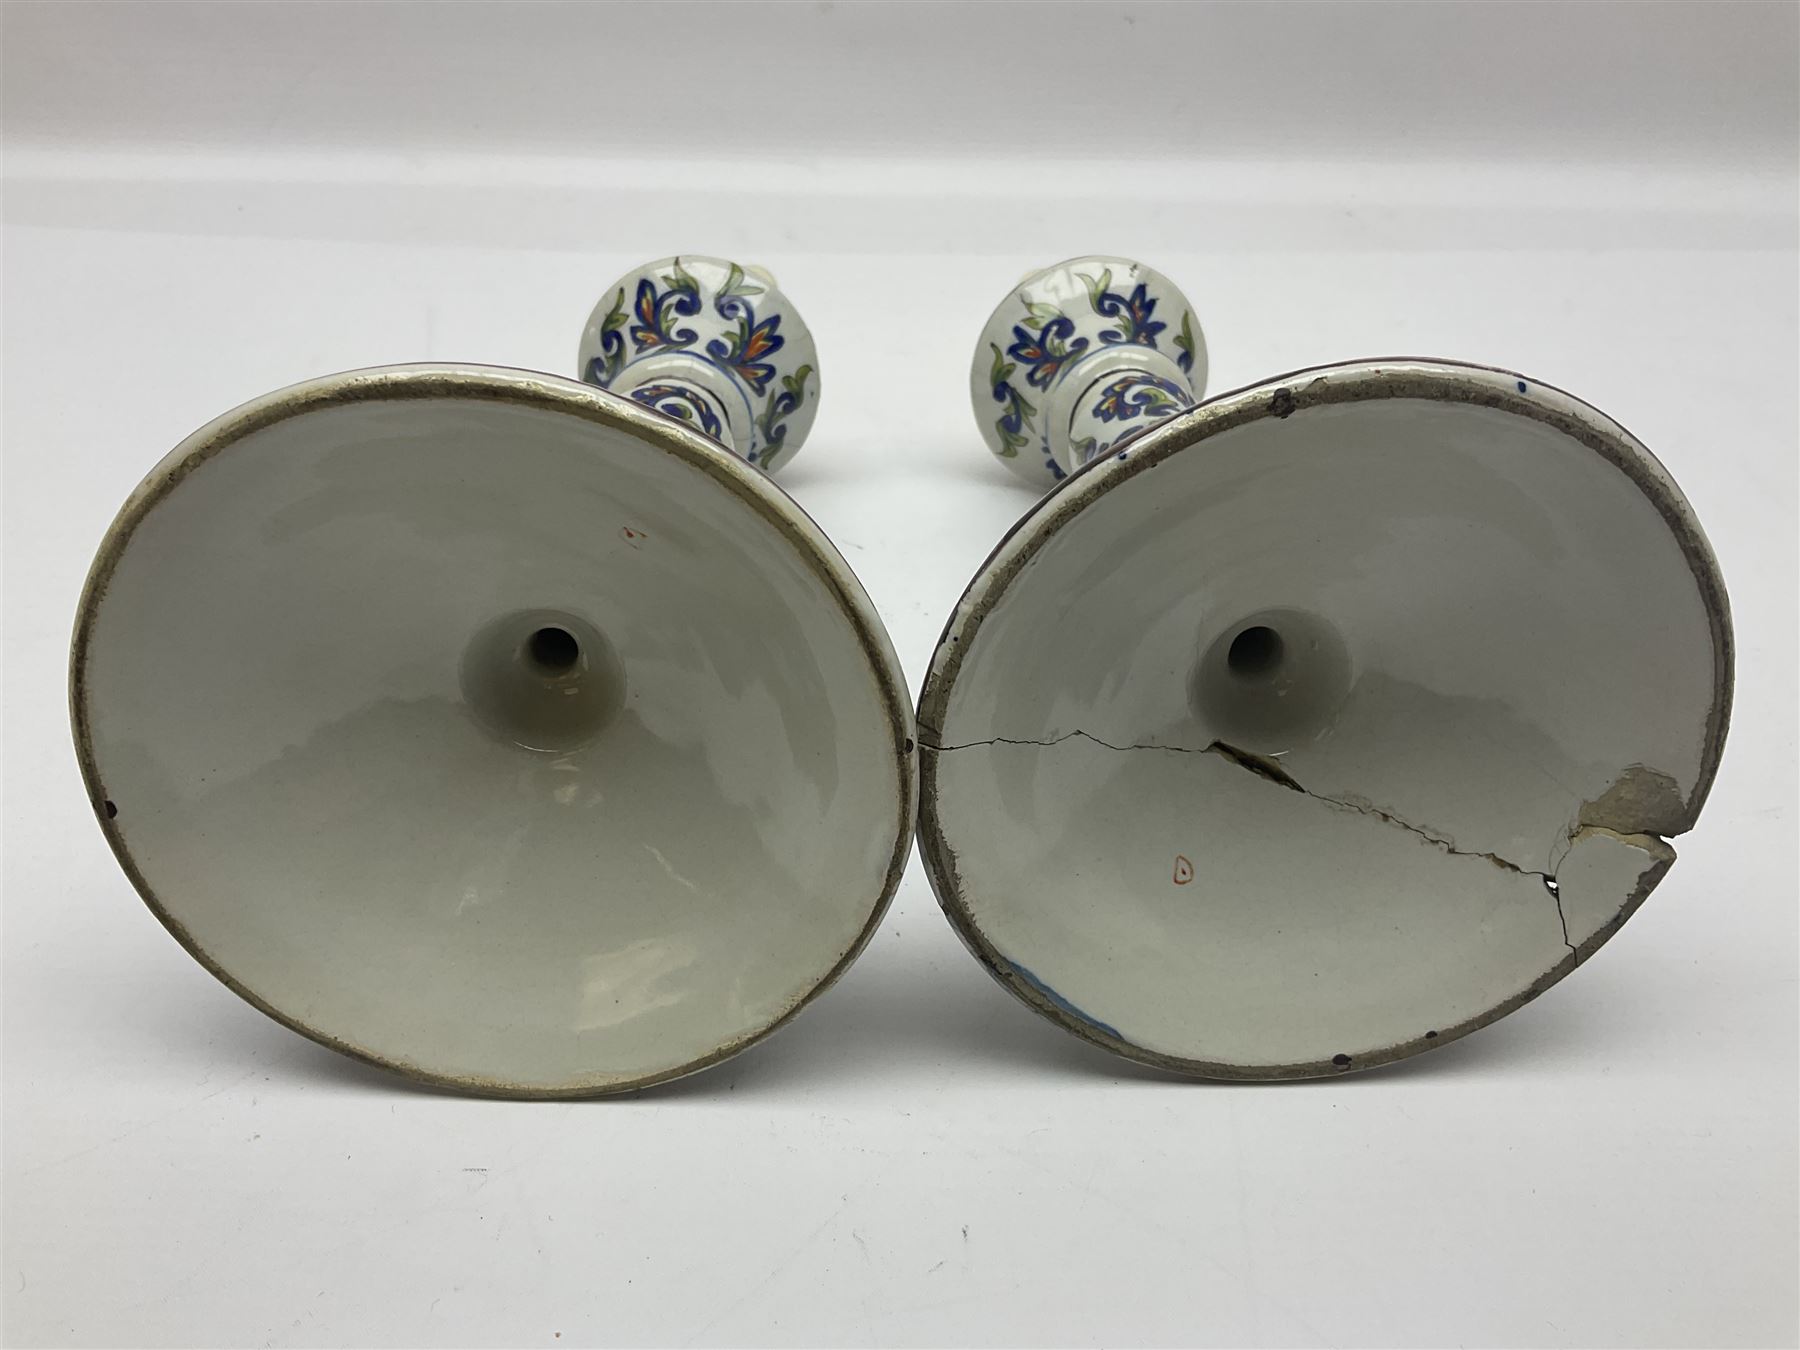 Pair of 19th century French faience candlesticks - Image 9 of 10